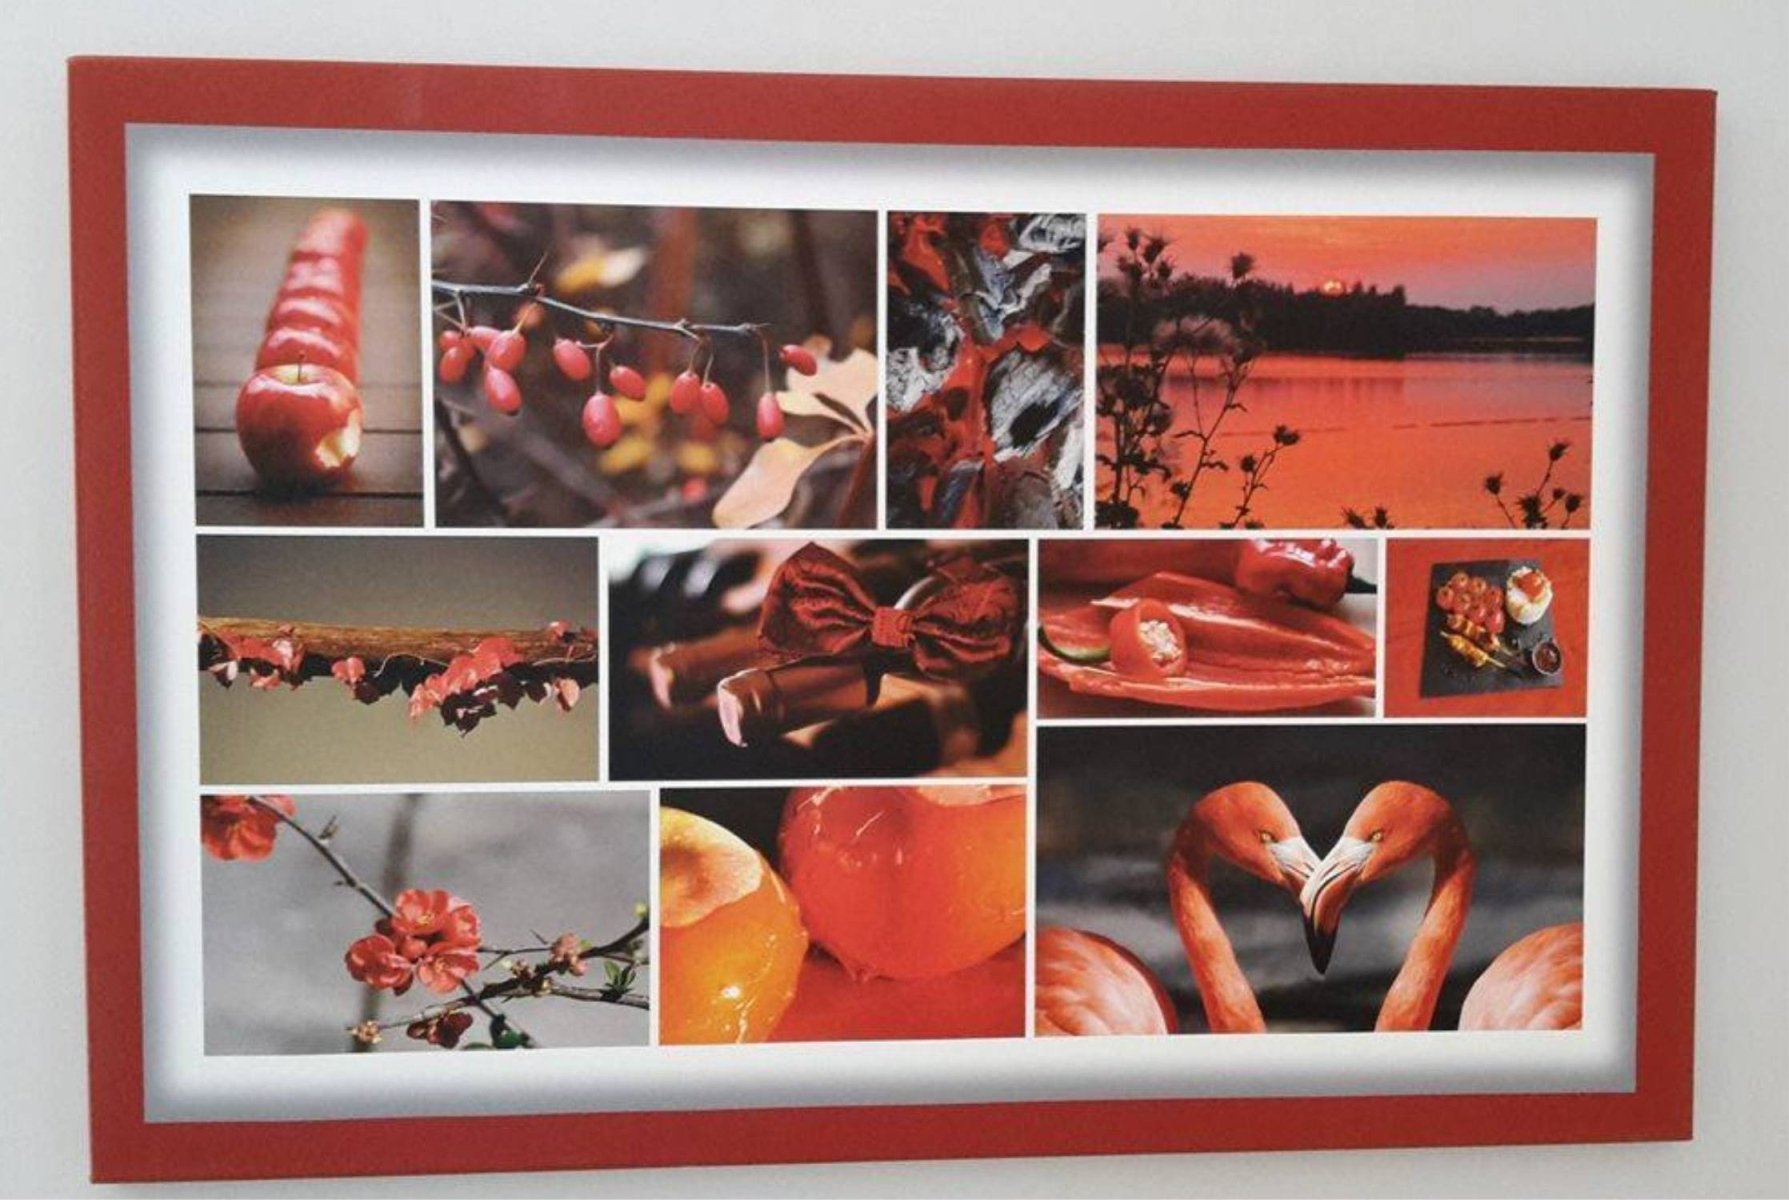 Collage of several photos - the floating frame is also printed